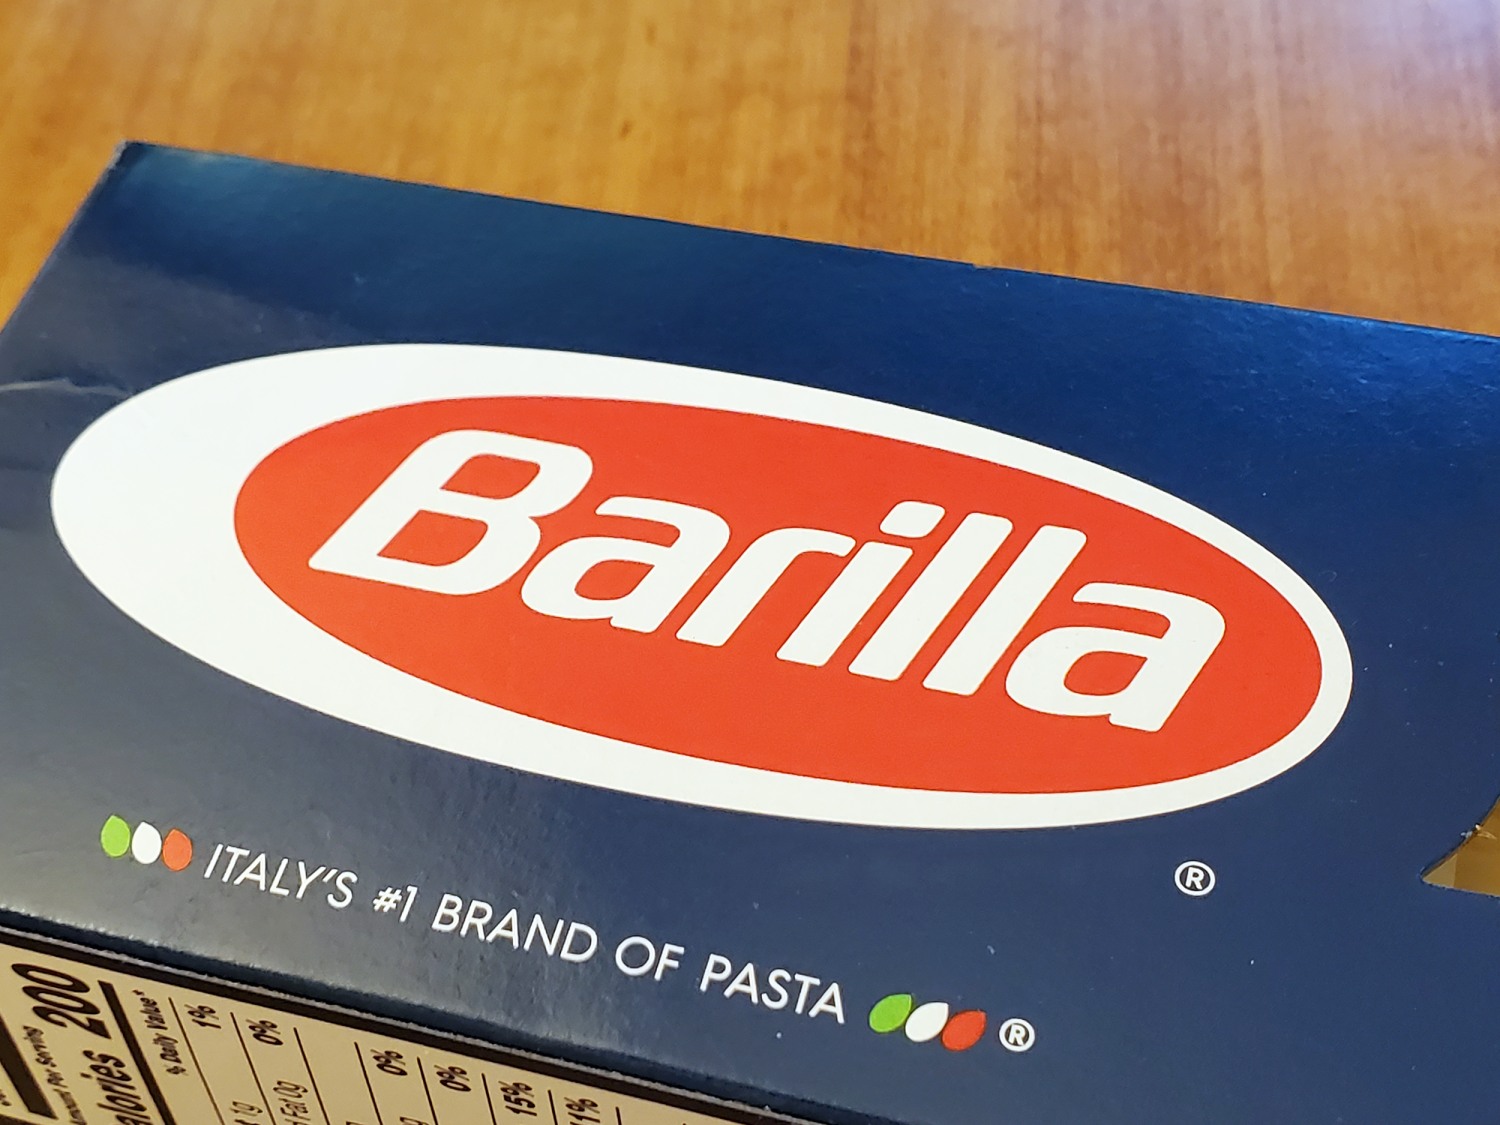 Barilla Isn't Really 'Italy's #1 Brand of Pasta,' Says Lawsuit